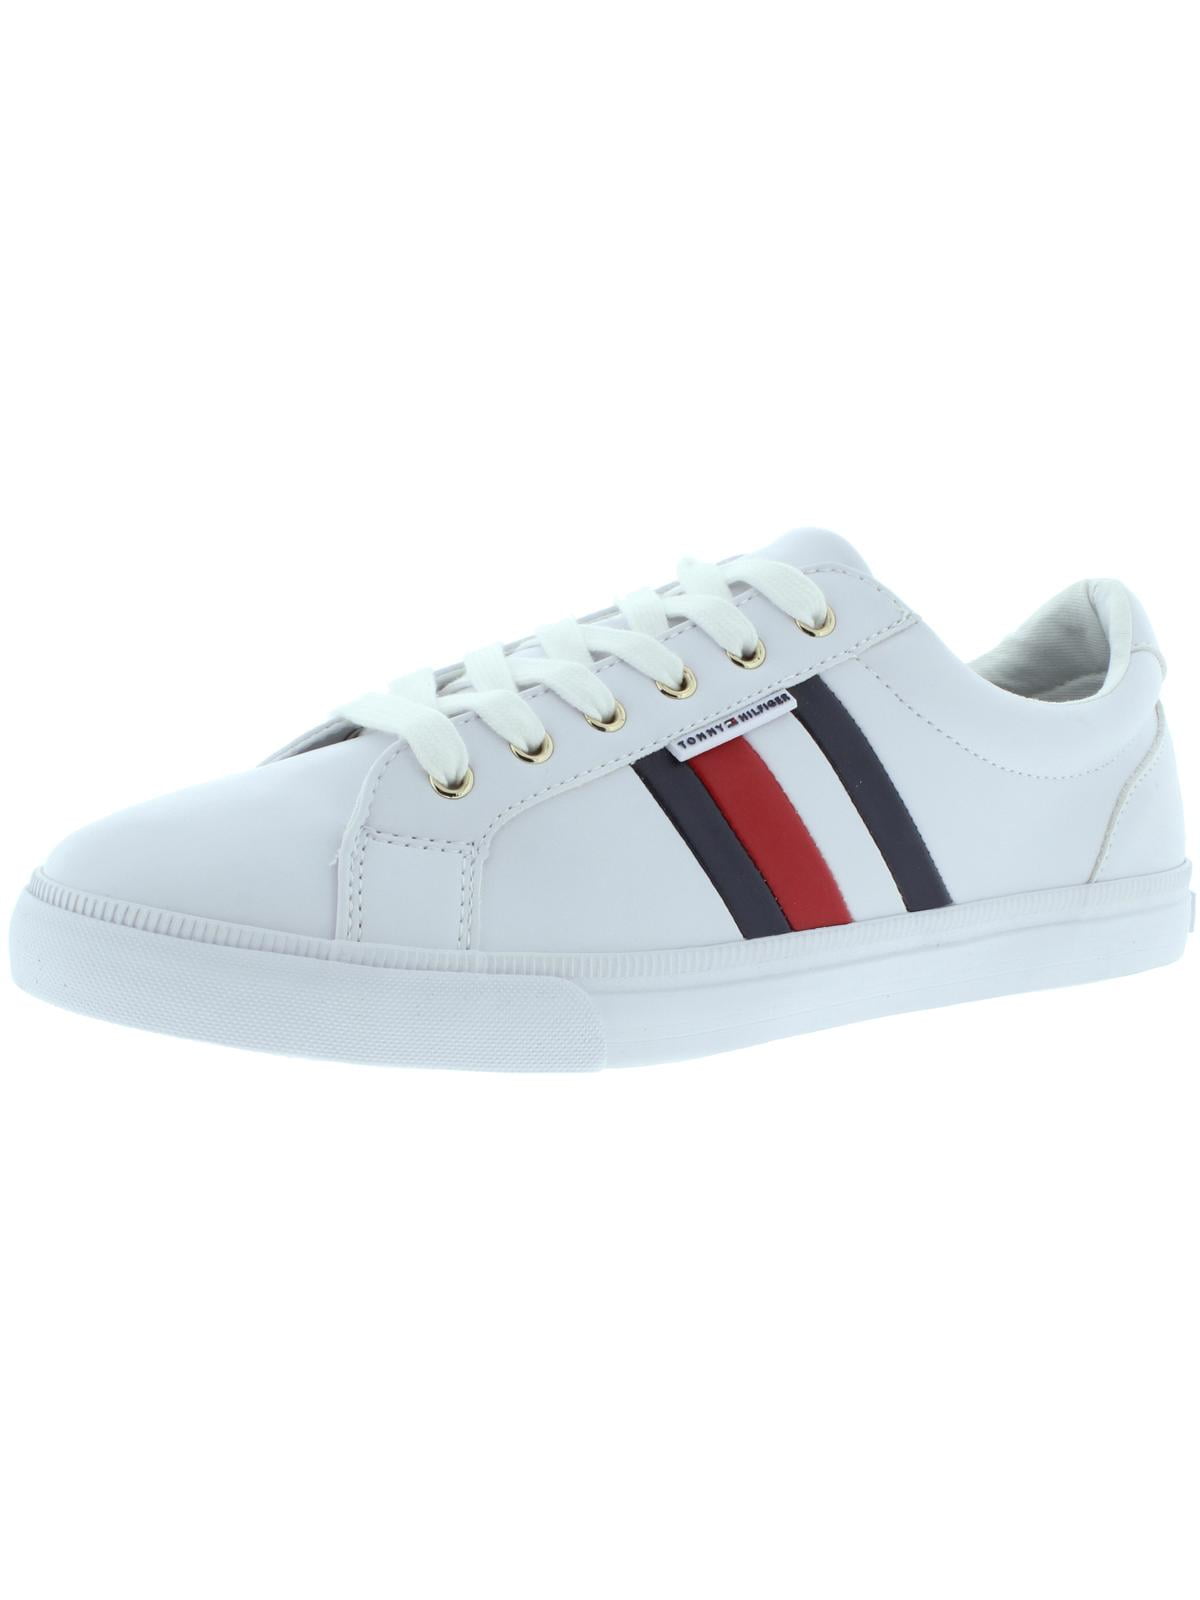 Tommy Hilfiger Shoes | Buy Tommy Hilfiger Shoes Online | THE ICONIC